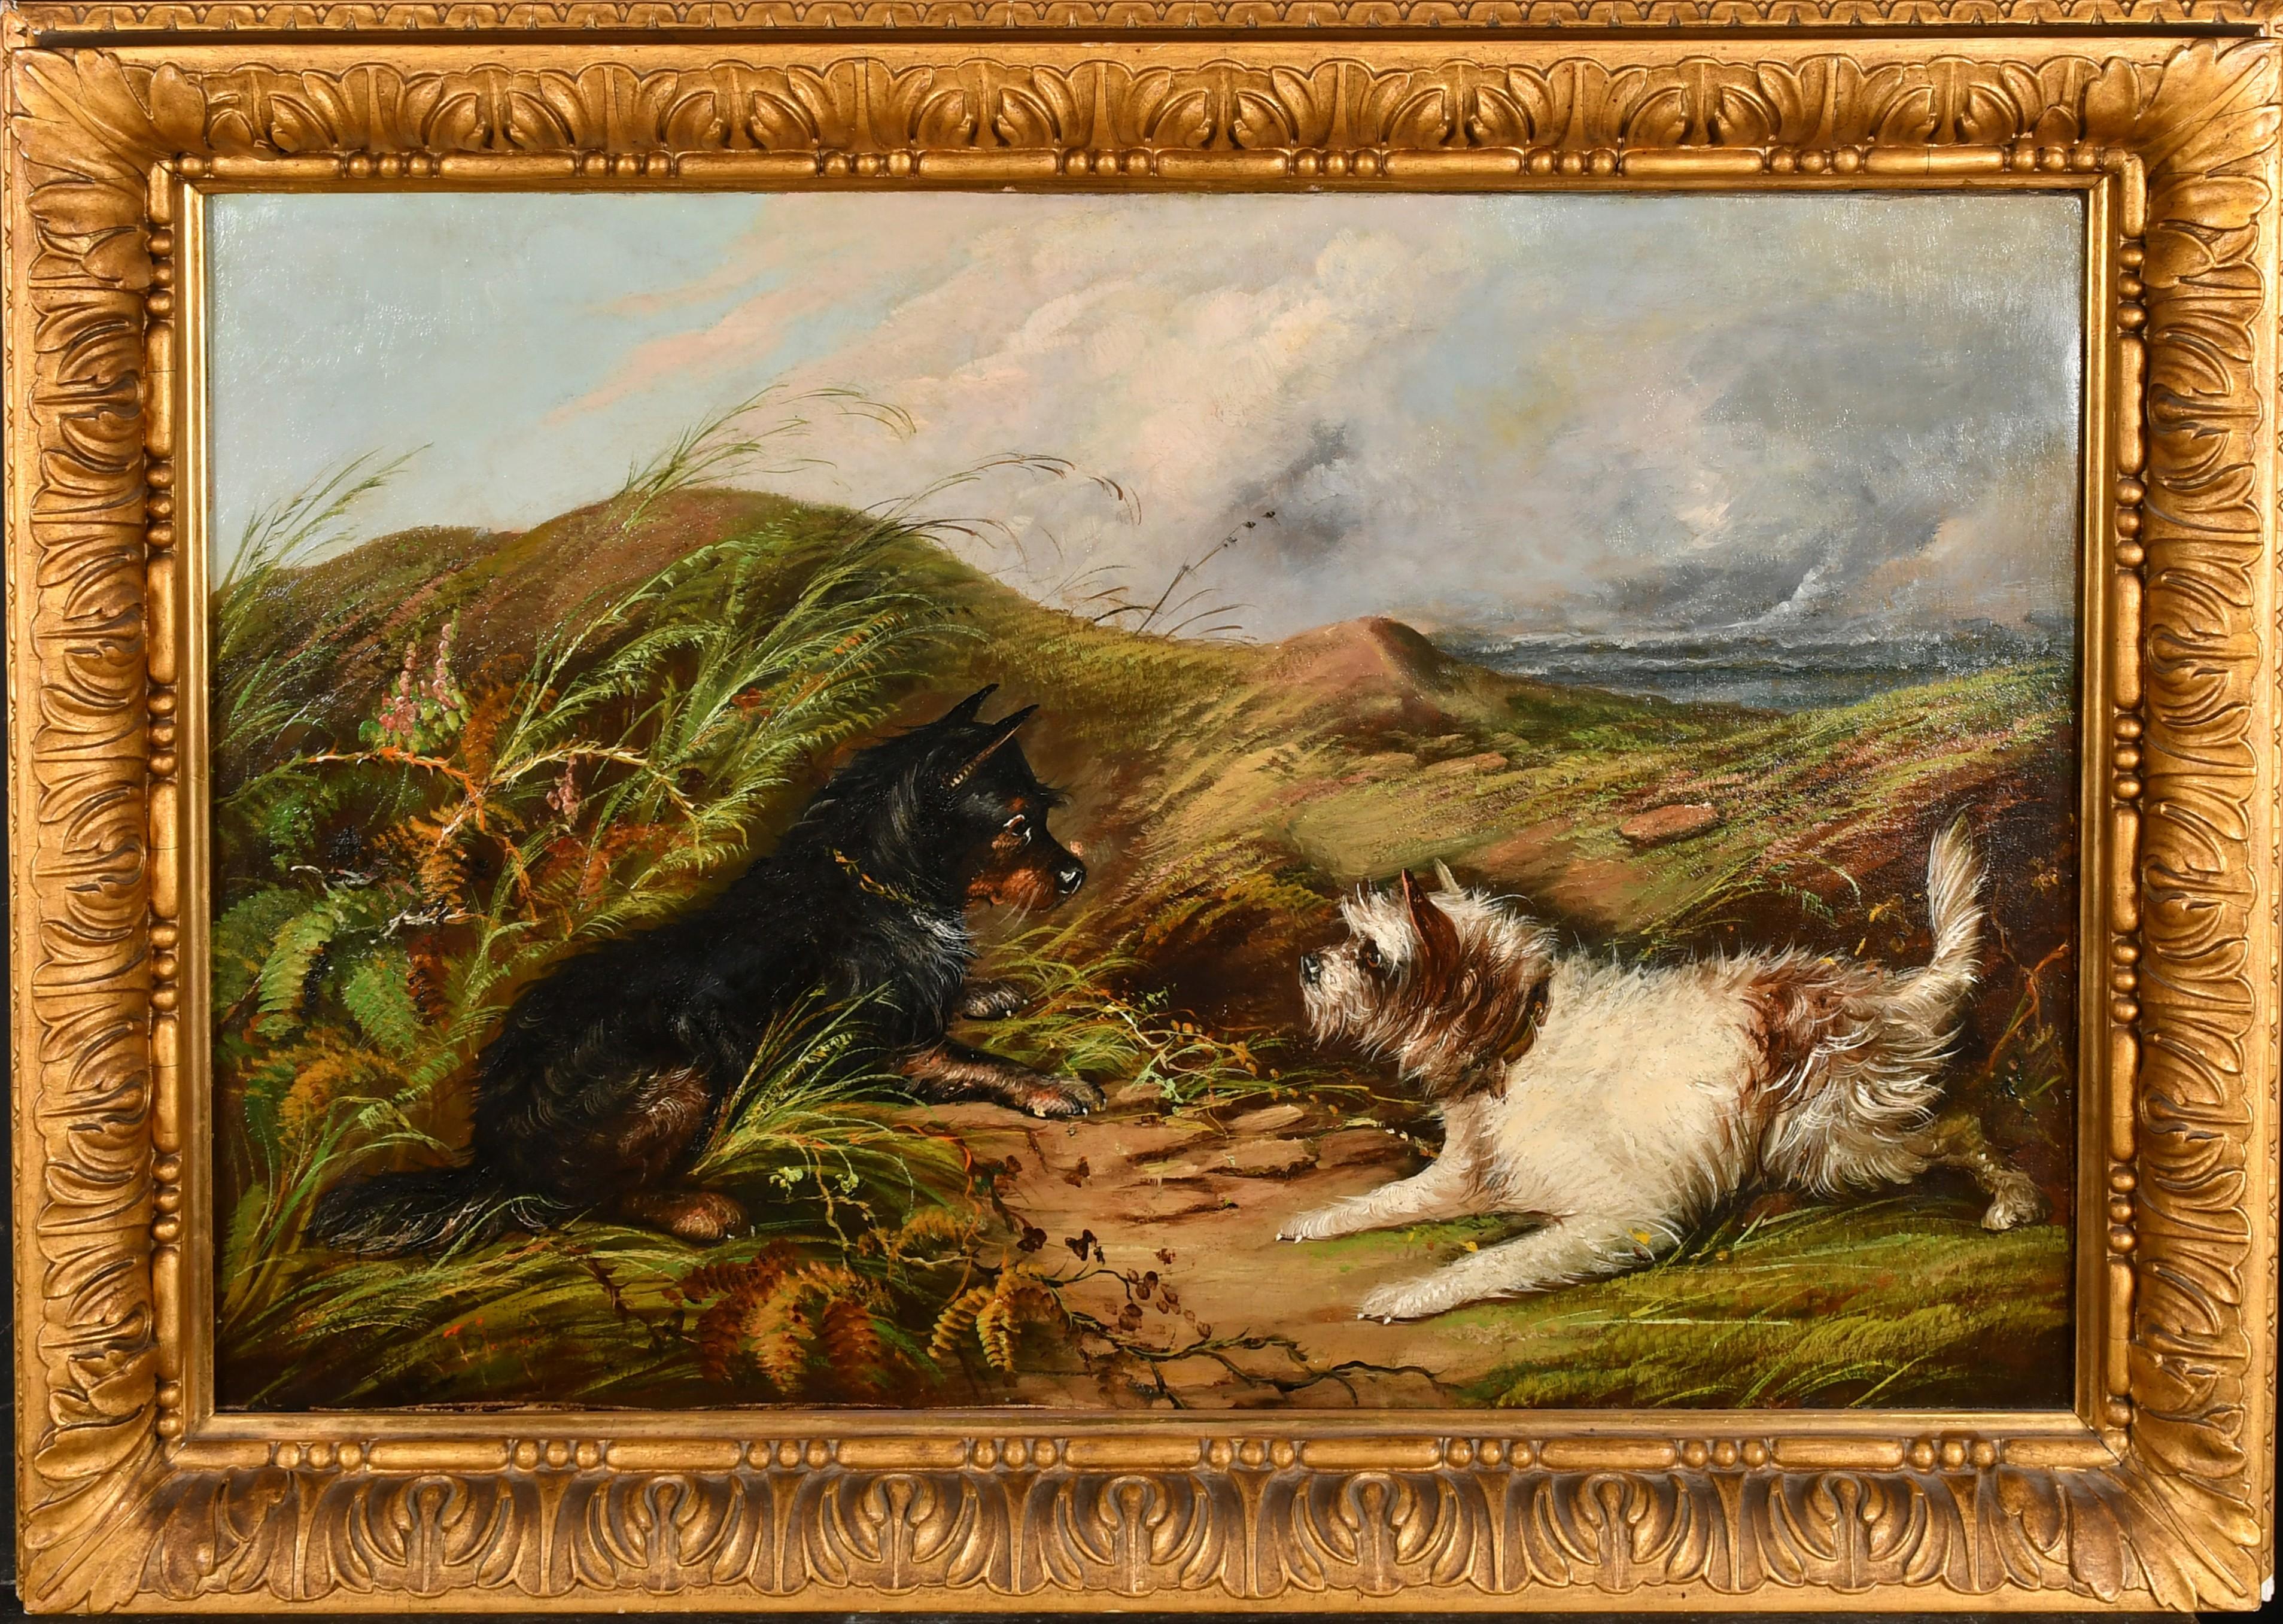 J. Langlois (c. 1855-1904) Landscape Painting - Signed Victorian Oil Painting Terrier Dogs by Rabbit Hole Coastal Sand Dunes